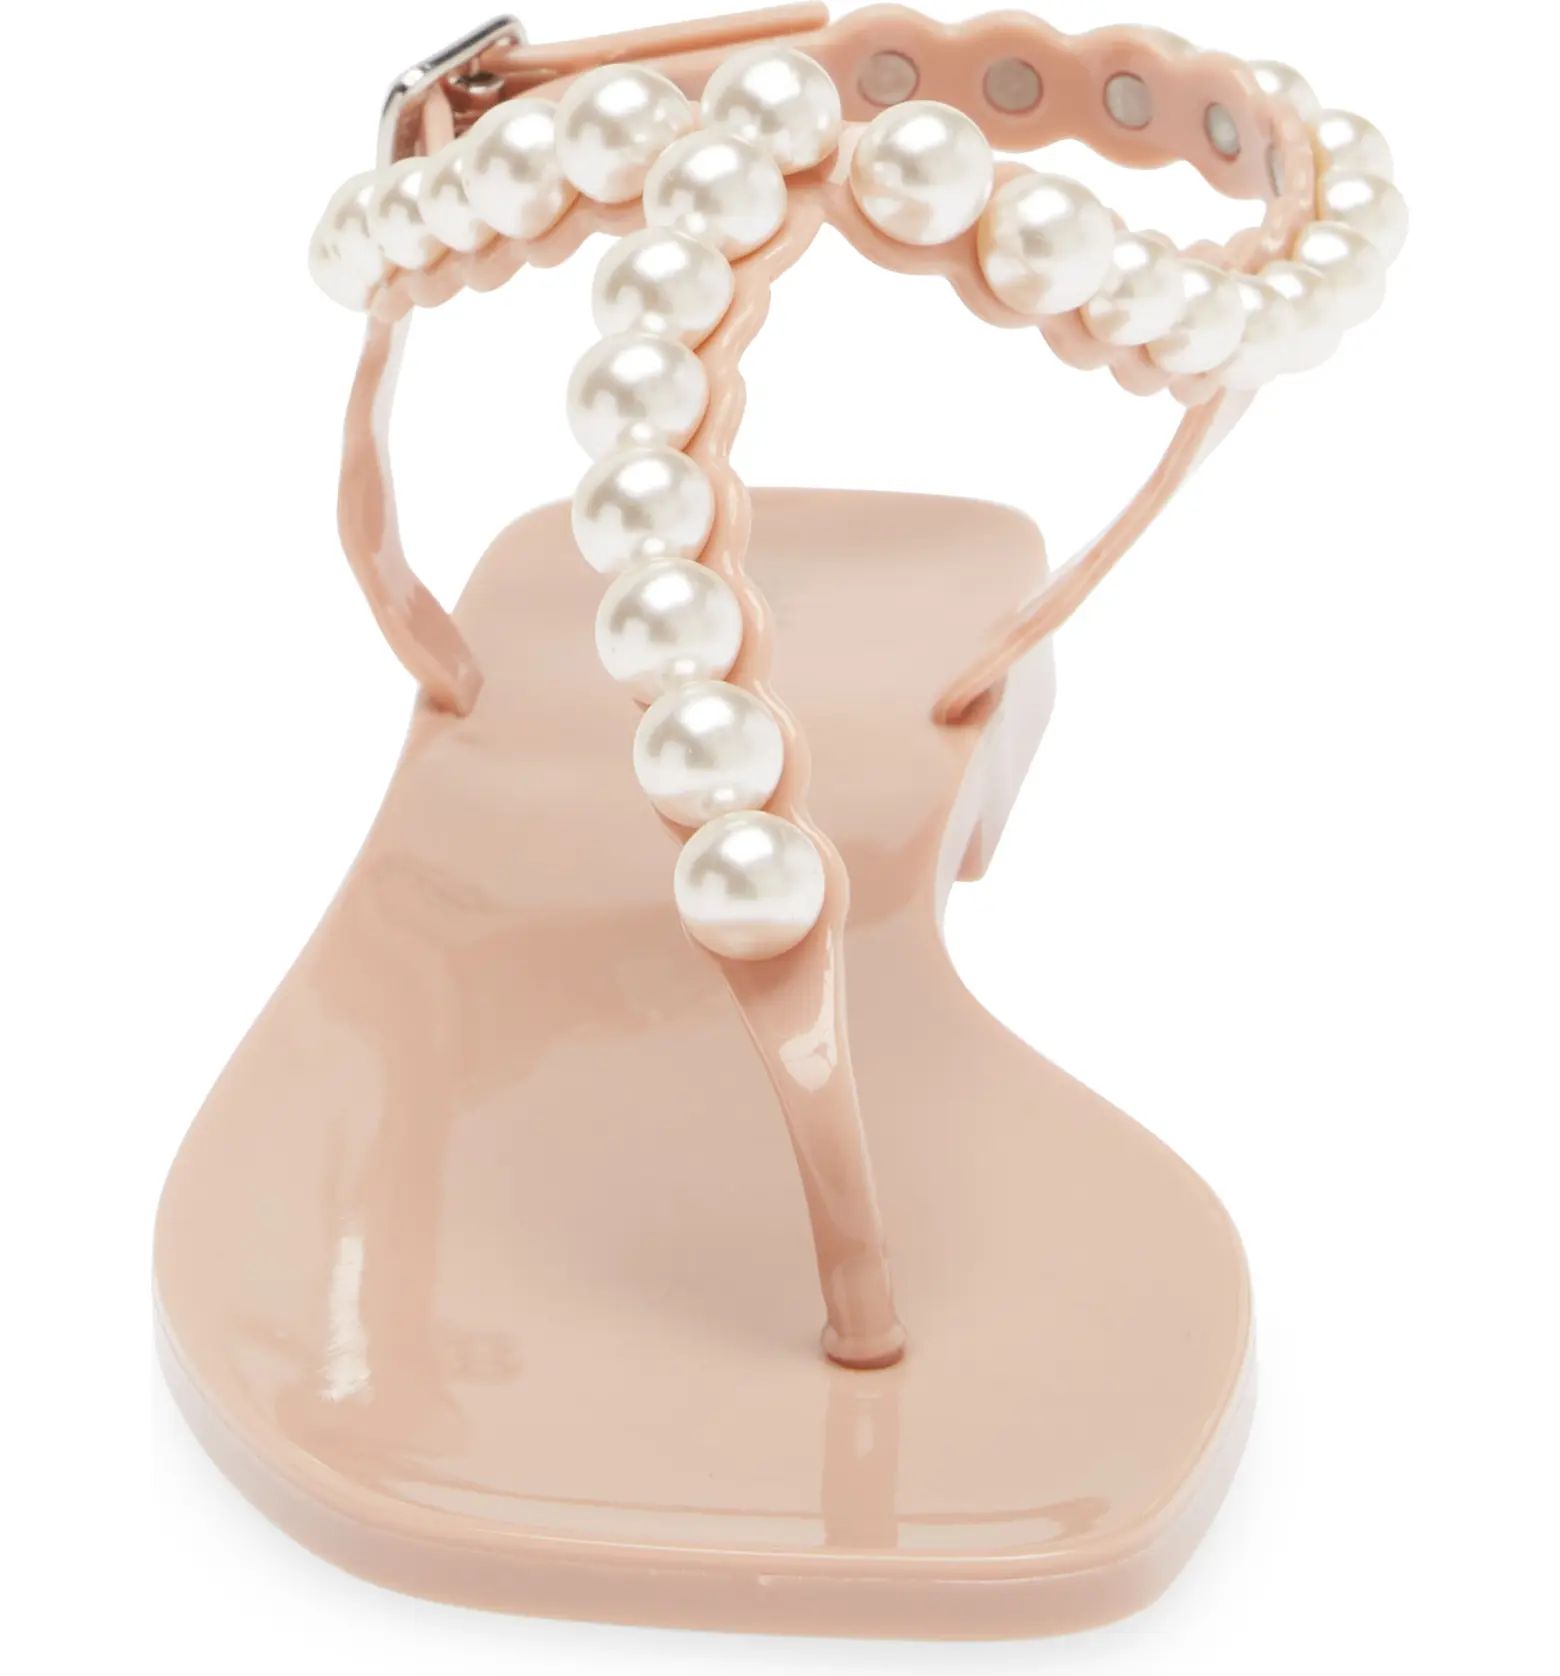 Pearlesque Imitation Pearl Ankle Strap Sandal (Women) | Nordstrom